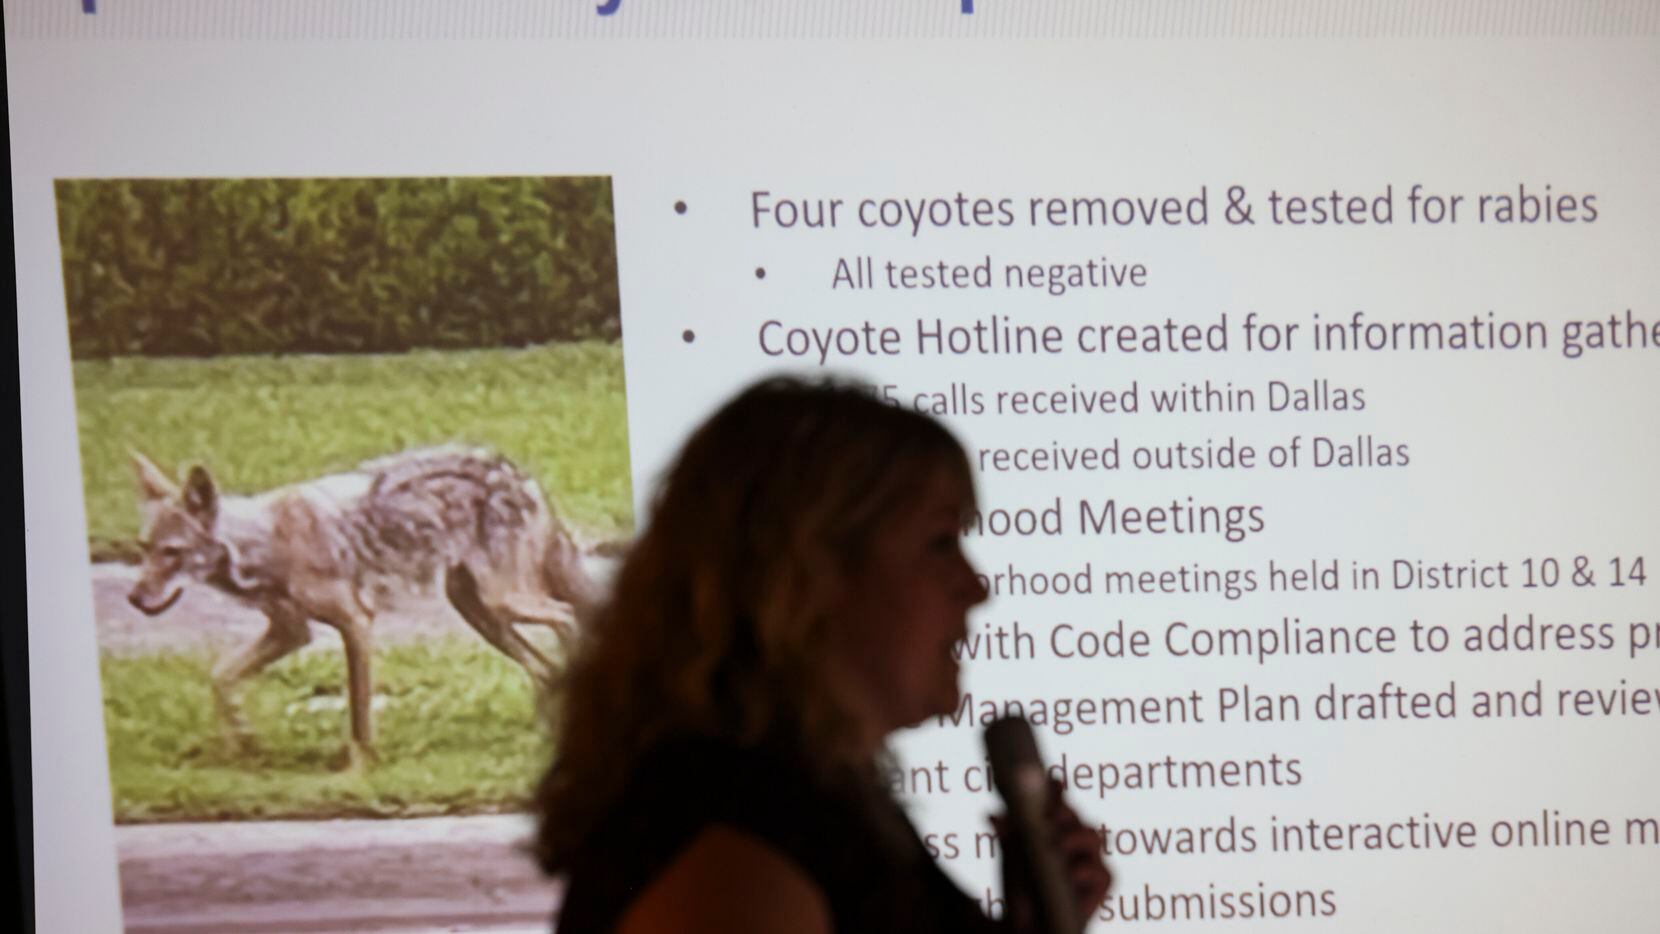 Whitney Bollinger, assistant director at Dallas Animal Services, presented a coyote response...